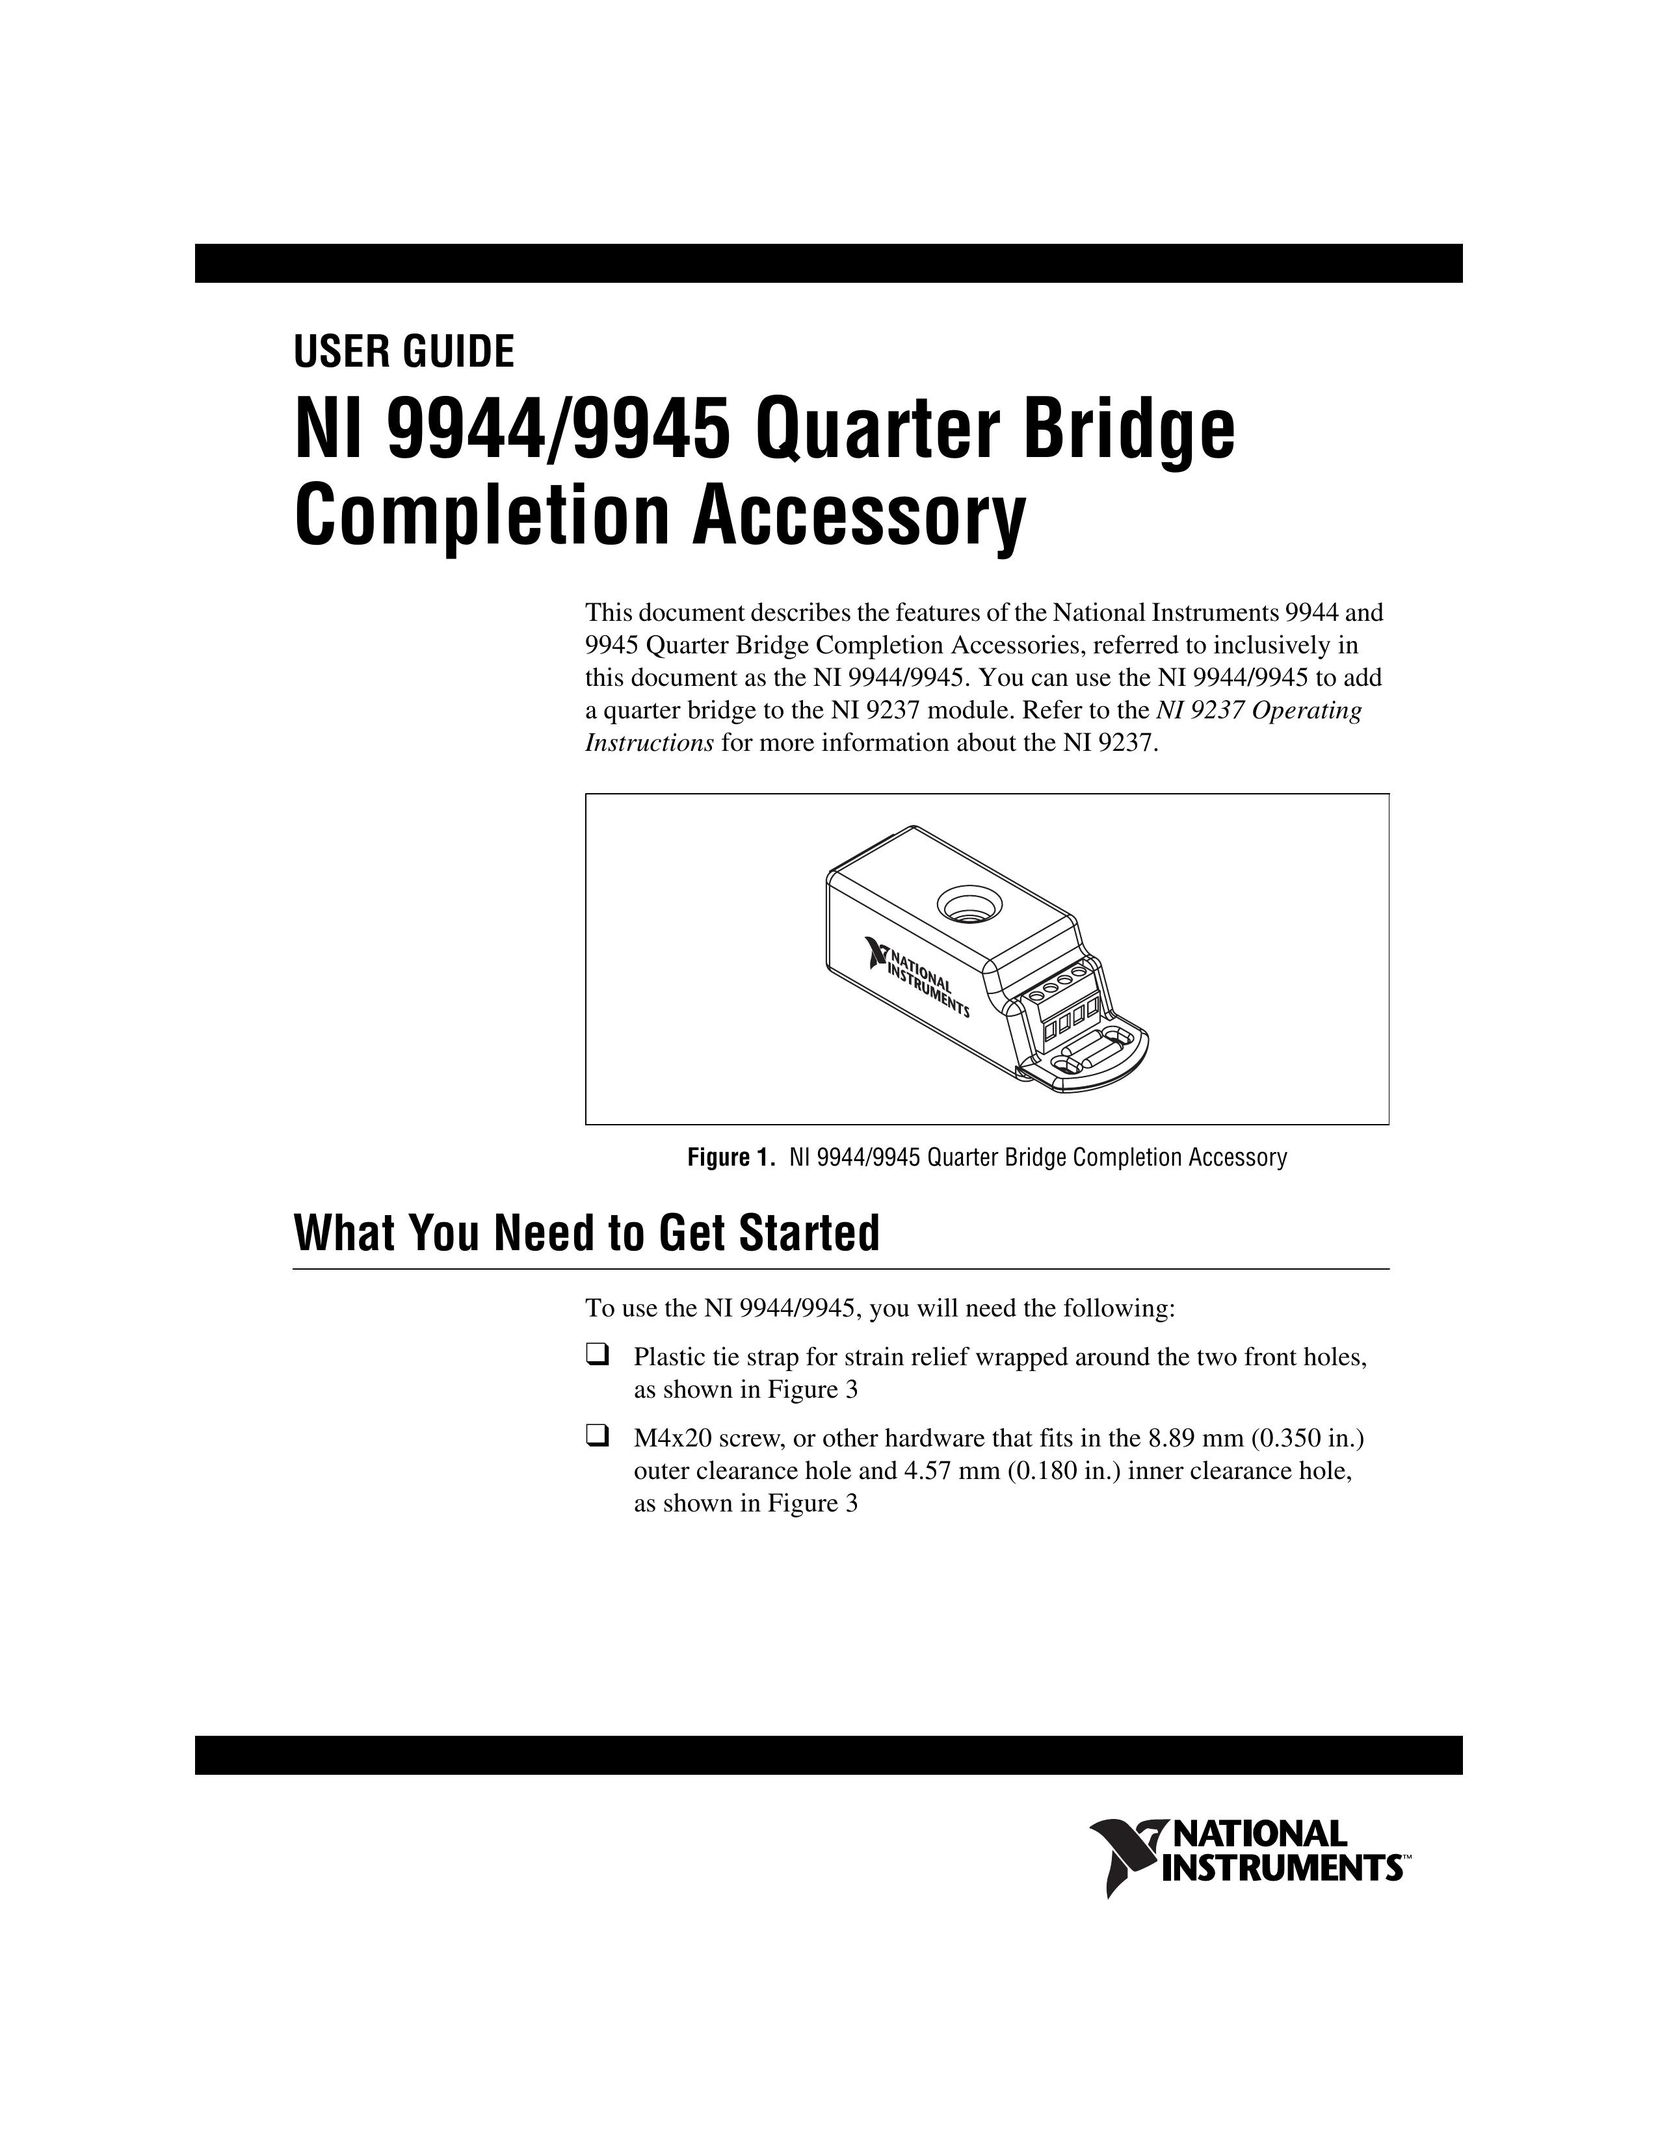 National Instruments NI 9945 Network Router User Manual